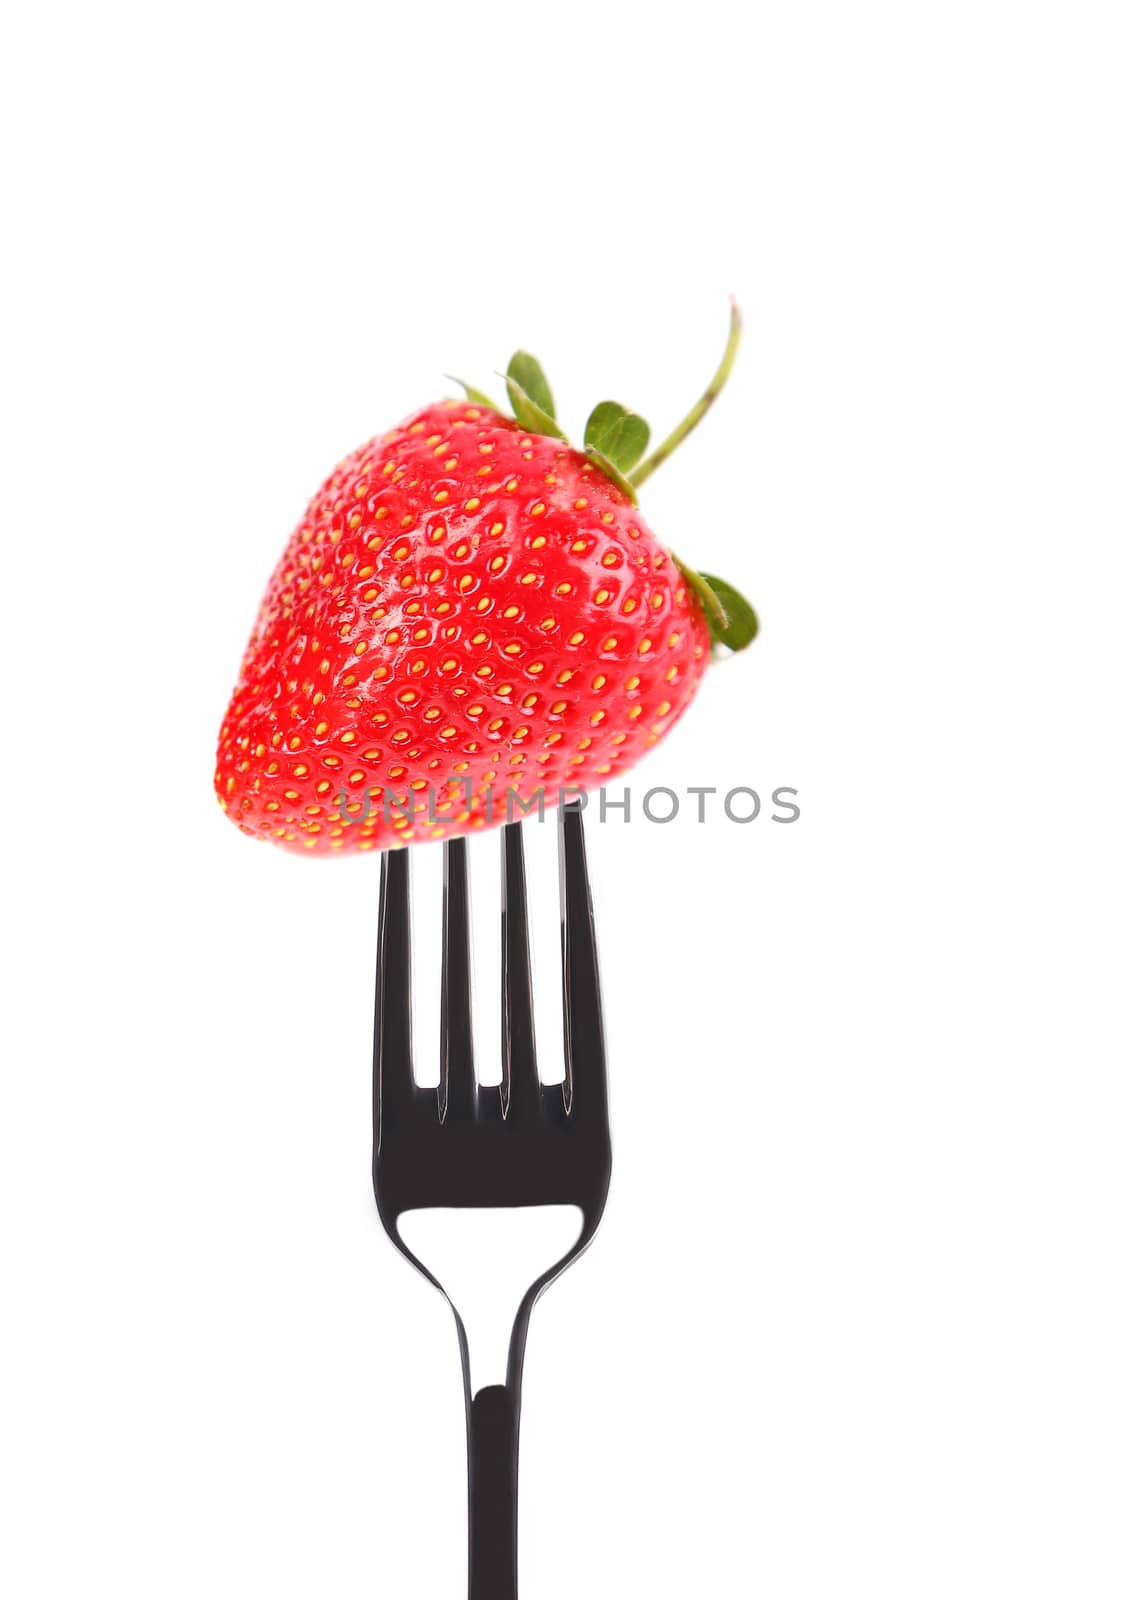 Strawberry on a fork. by indigolotos